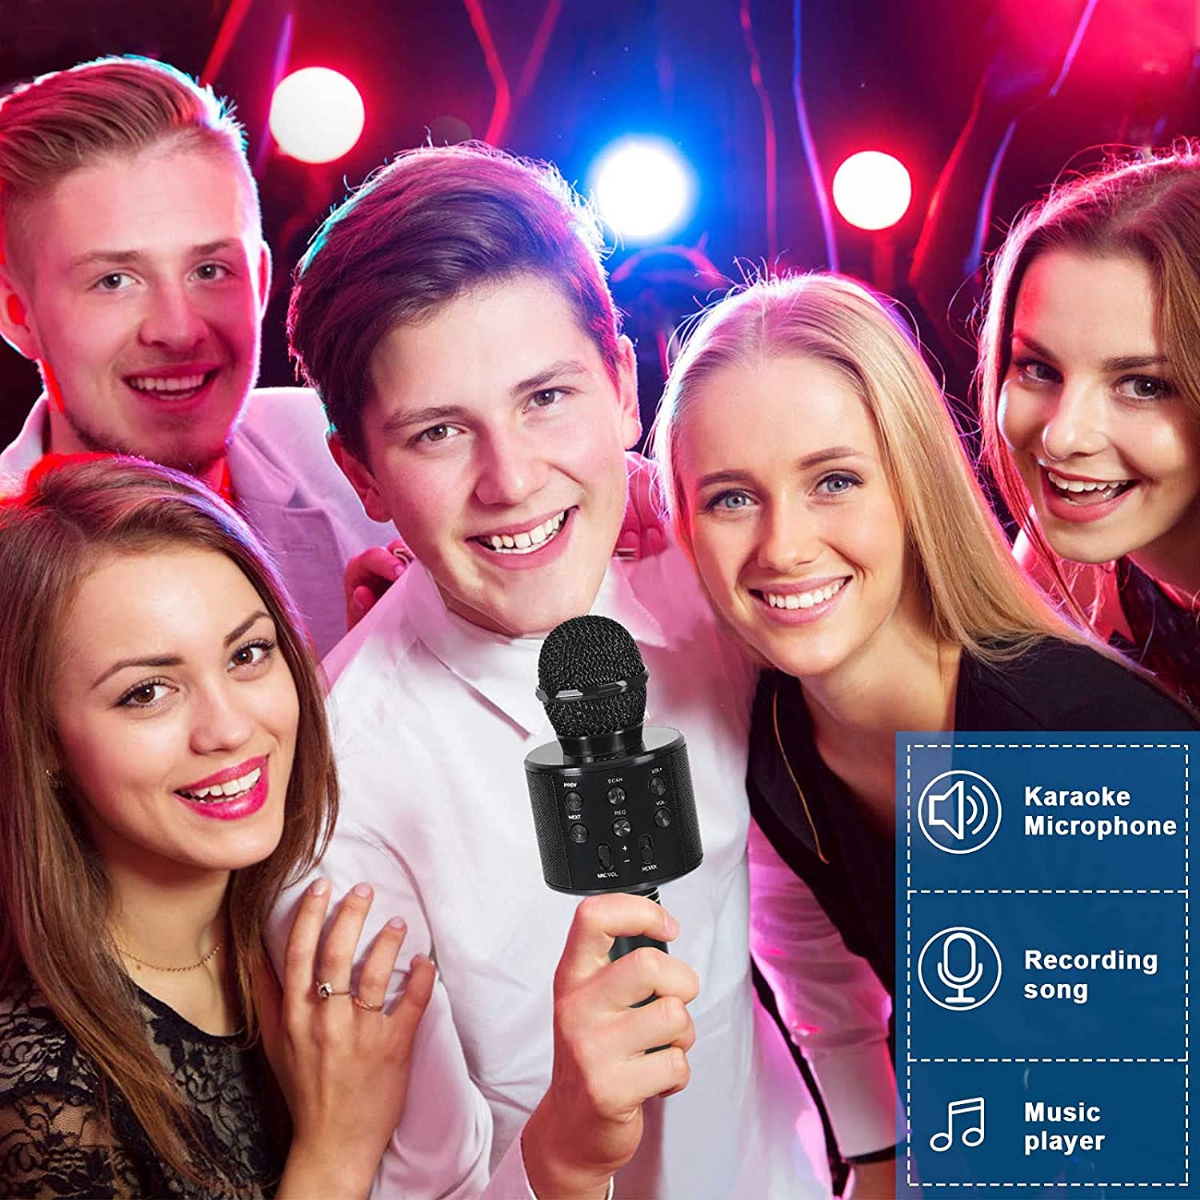 Wireless Karaoke Bluetooth Microphone Toys Xmas Gifts for Teens Kids Educational Toys for Kids Age 4 5 6 7 Gifts for Host or Parties Blue Dodosky Toys for Girls Boys Age 4 5 6 7 8 9 10 